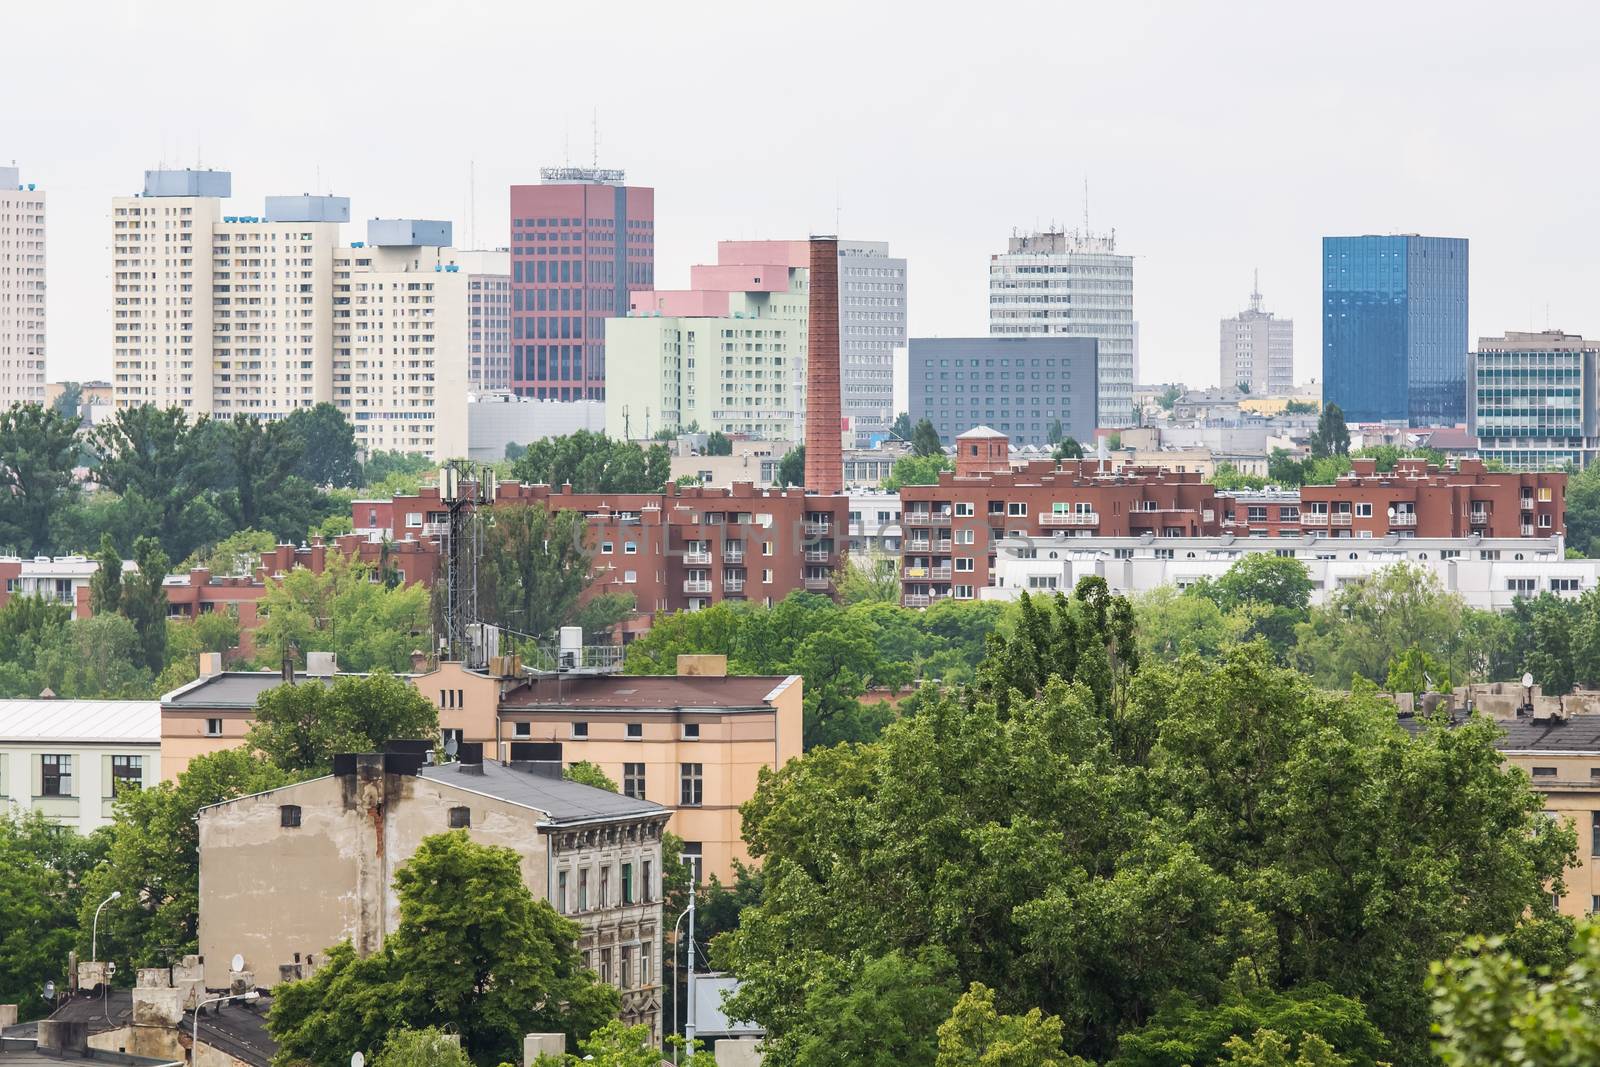 Panorama of city of Lodz in central Poland 